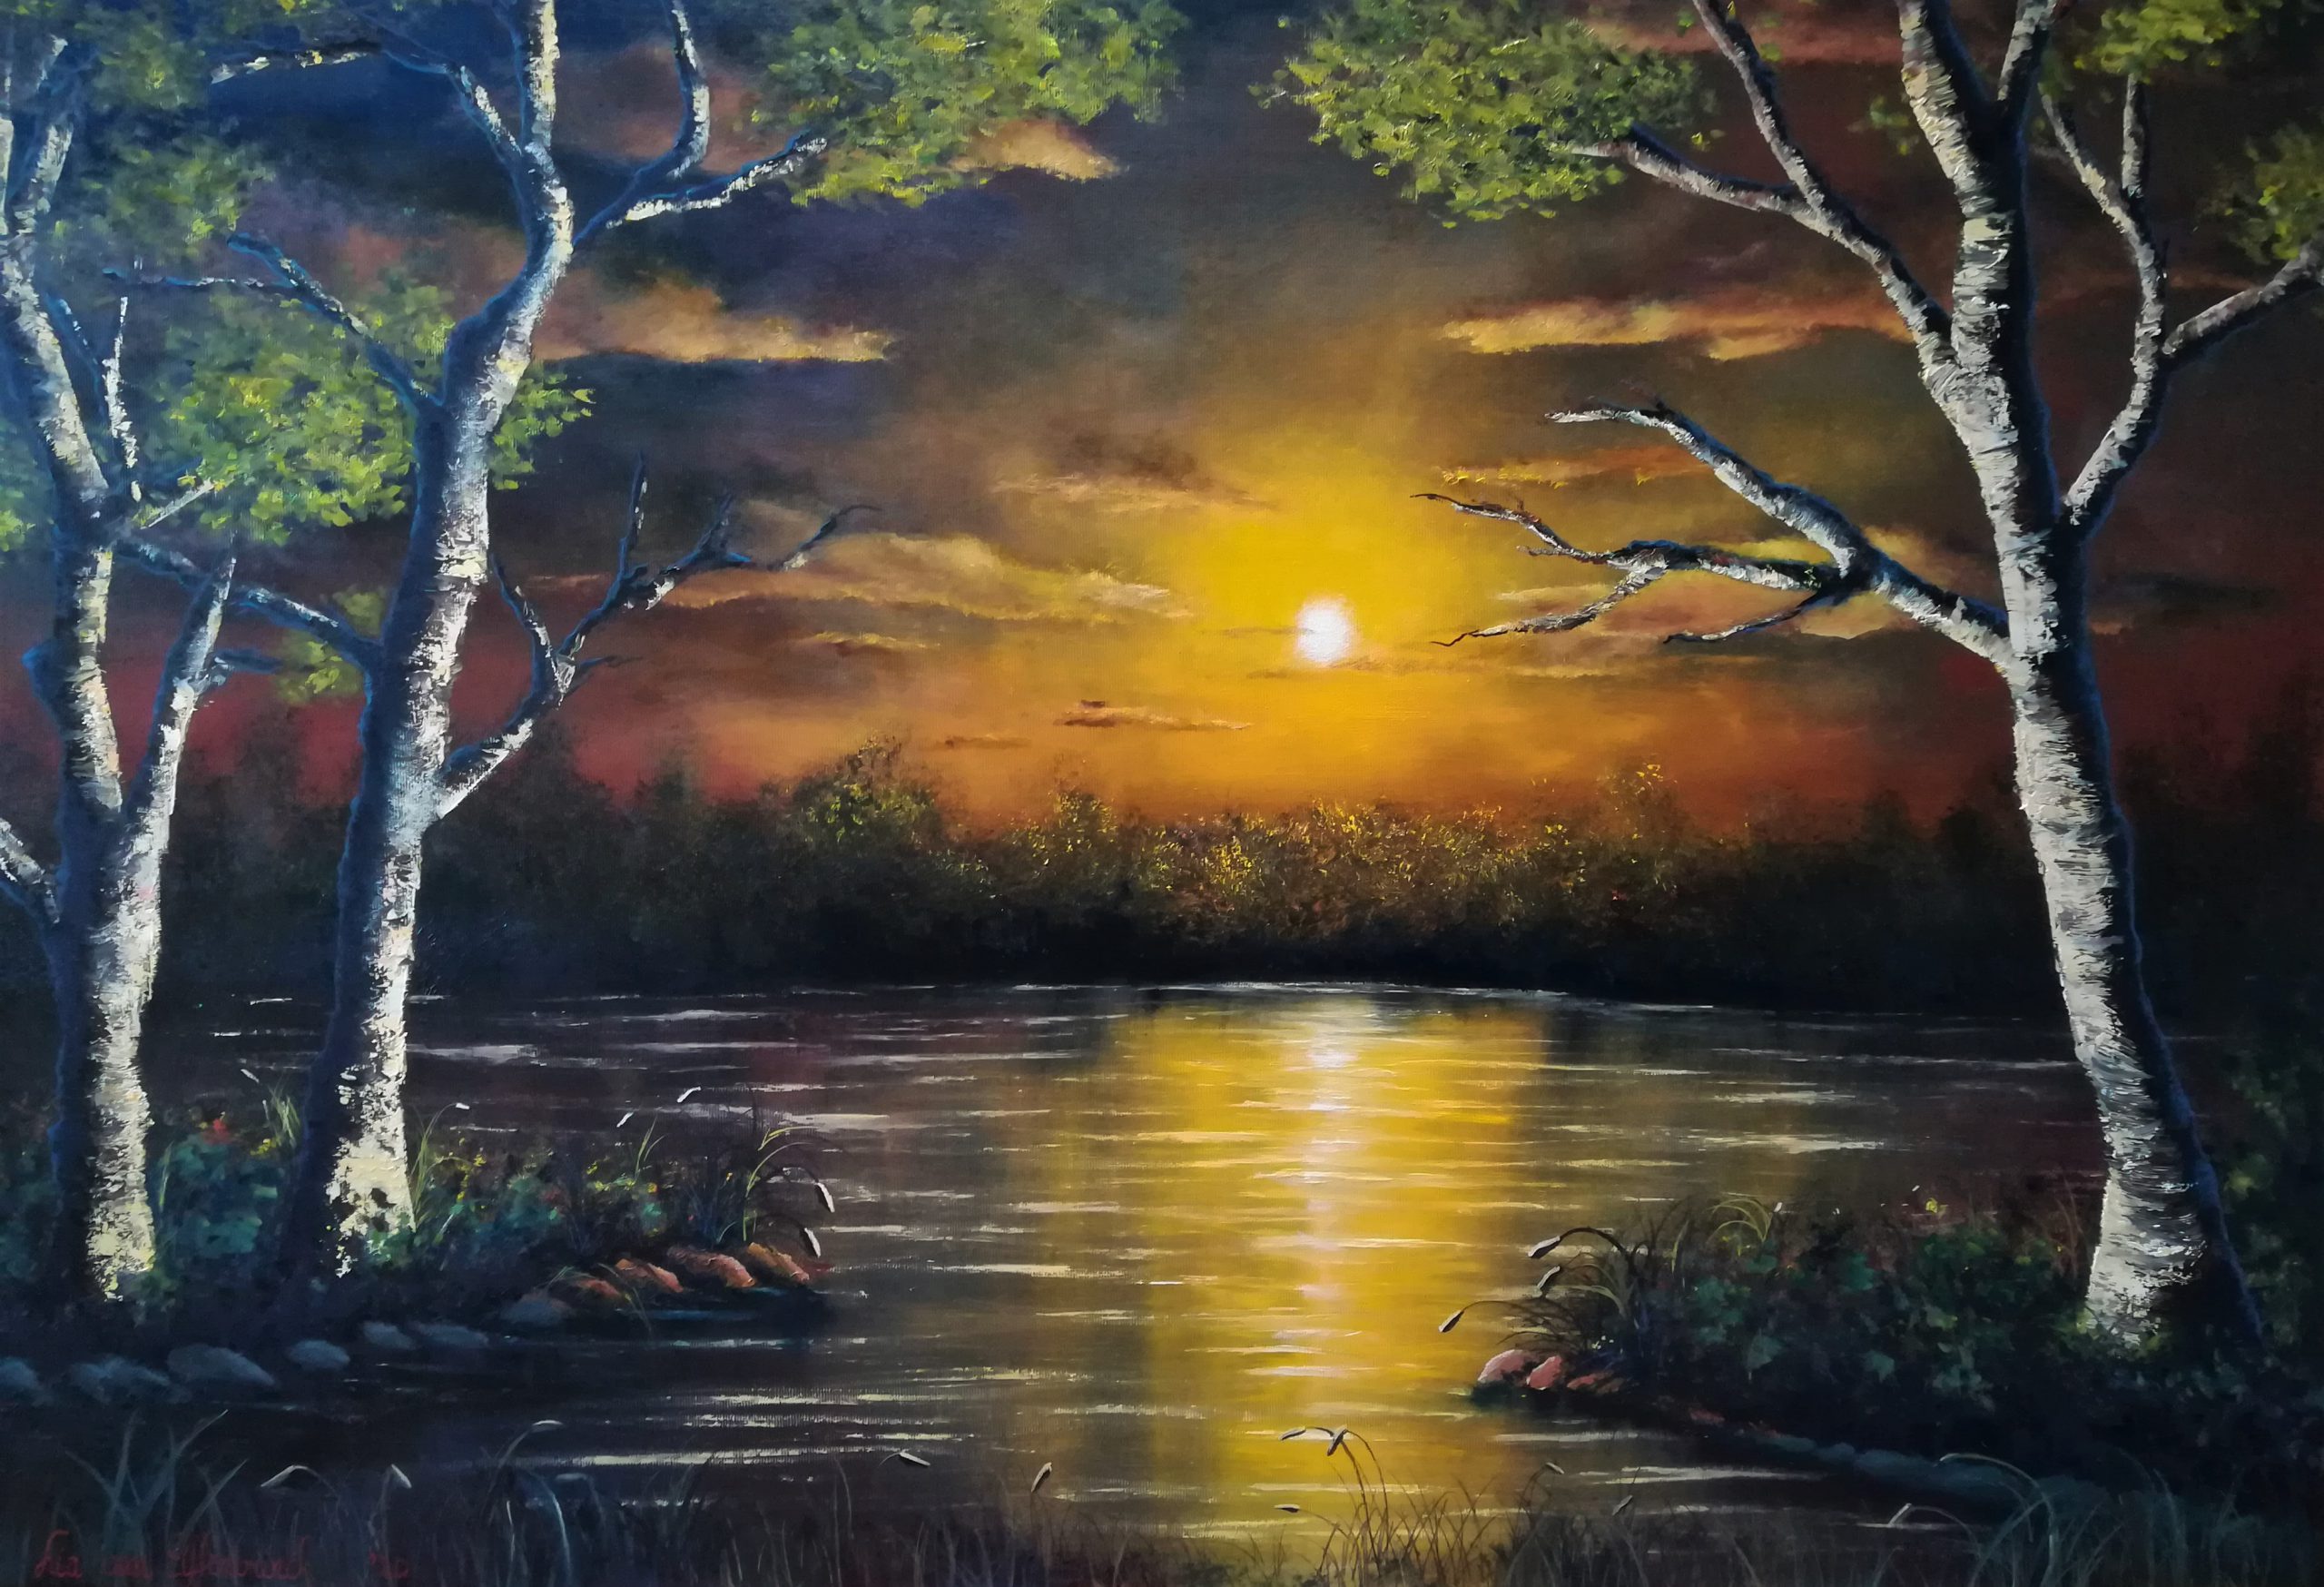 Edge of Sunset oil painting of a romantic yellow and orange sunset in a lake. There are three birch trees in the foreground.